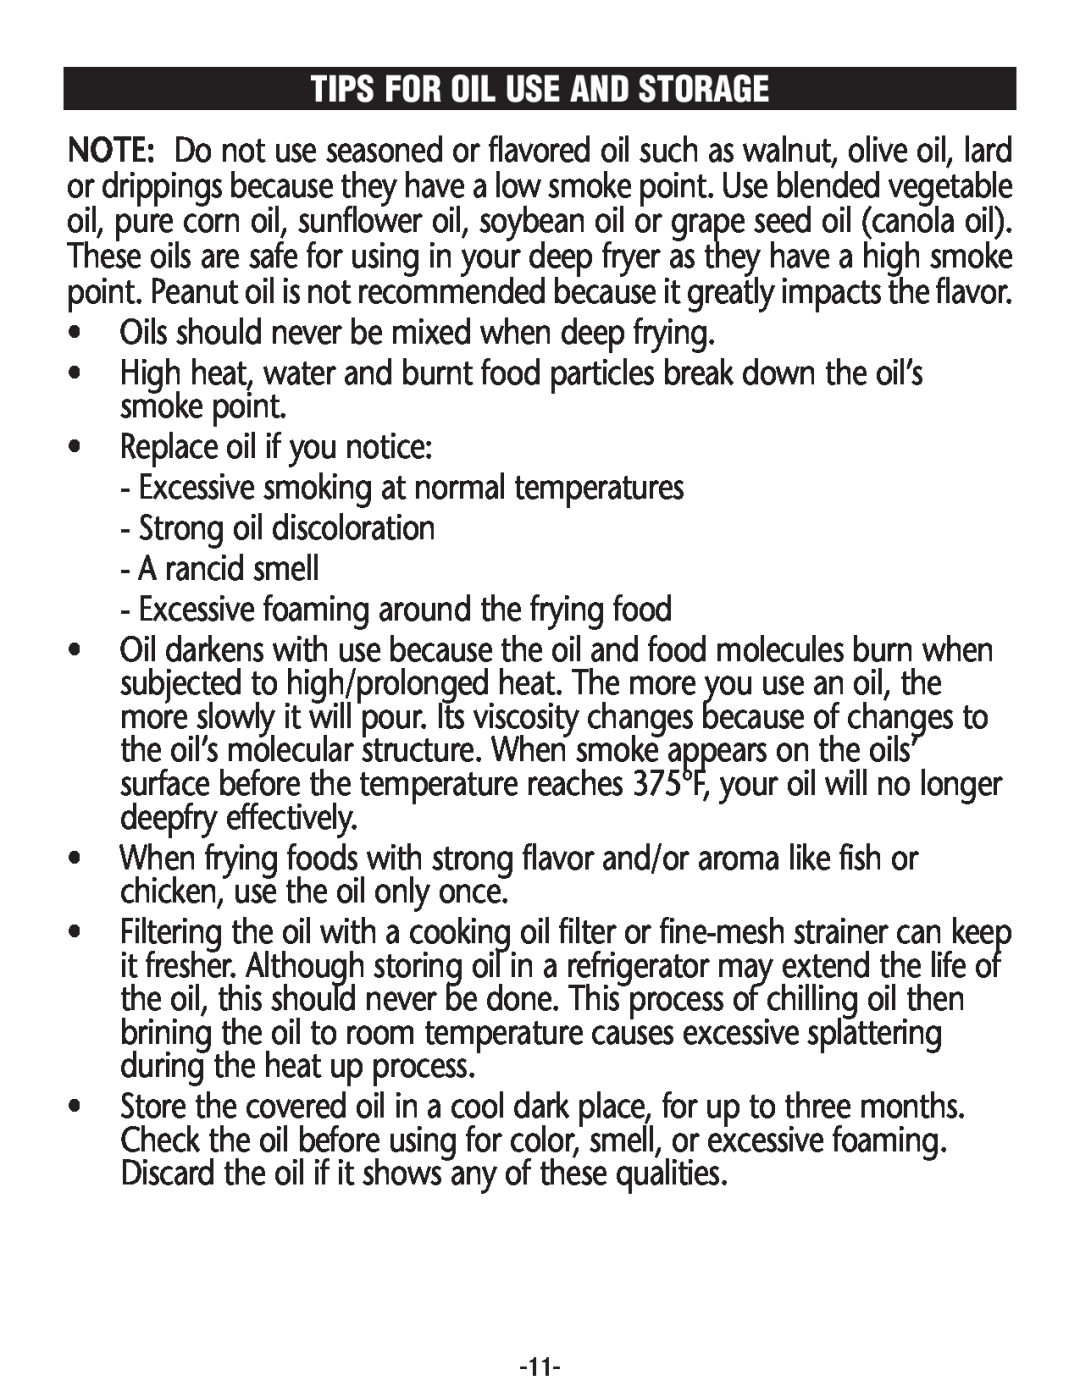 Rival CZF630 manual Tips For Oil Use And Storage, Oils should never be mixed when deep frying, Replace oil if you notice 